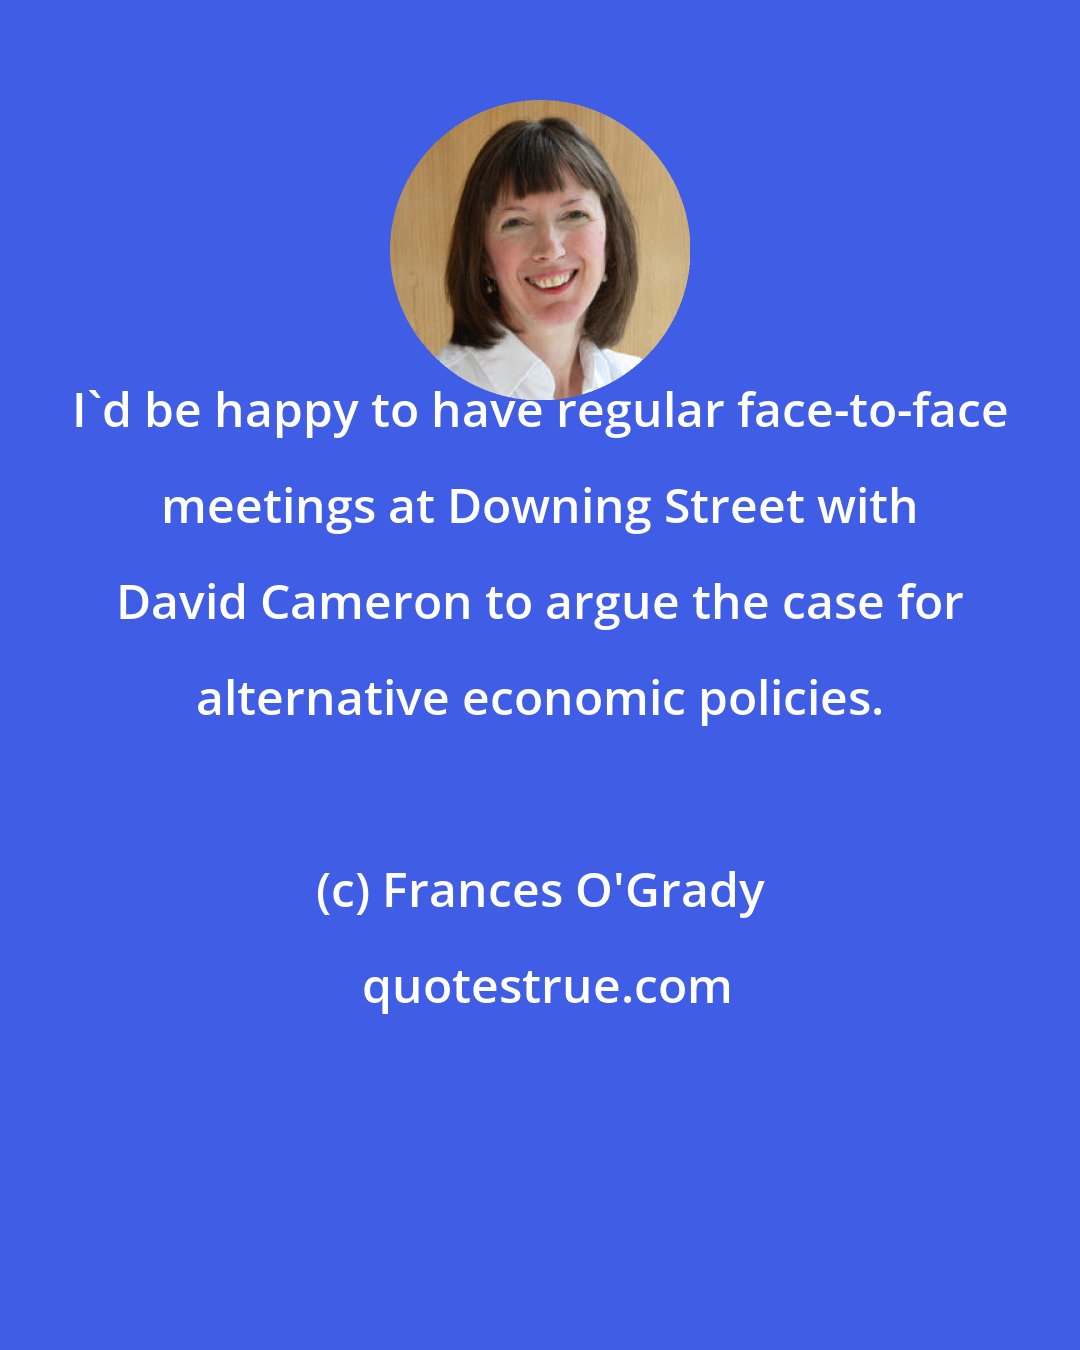 Frances O'Grady: I'd be happy to have regular face-to-face meetings at Downing Street with David Cameron to argue the case for alternative economic policies.